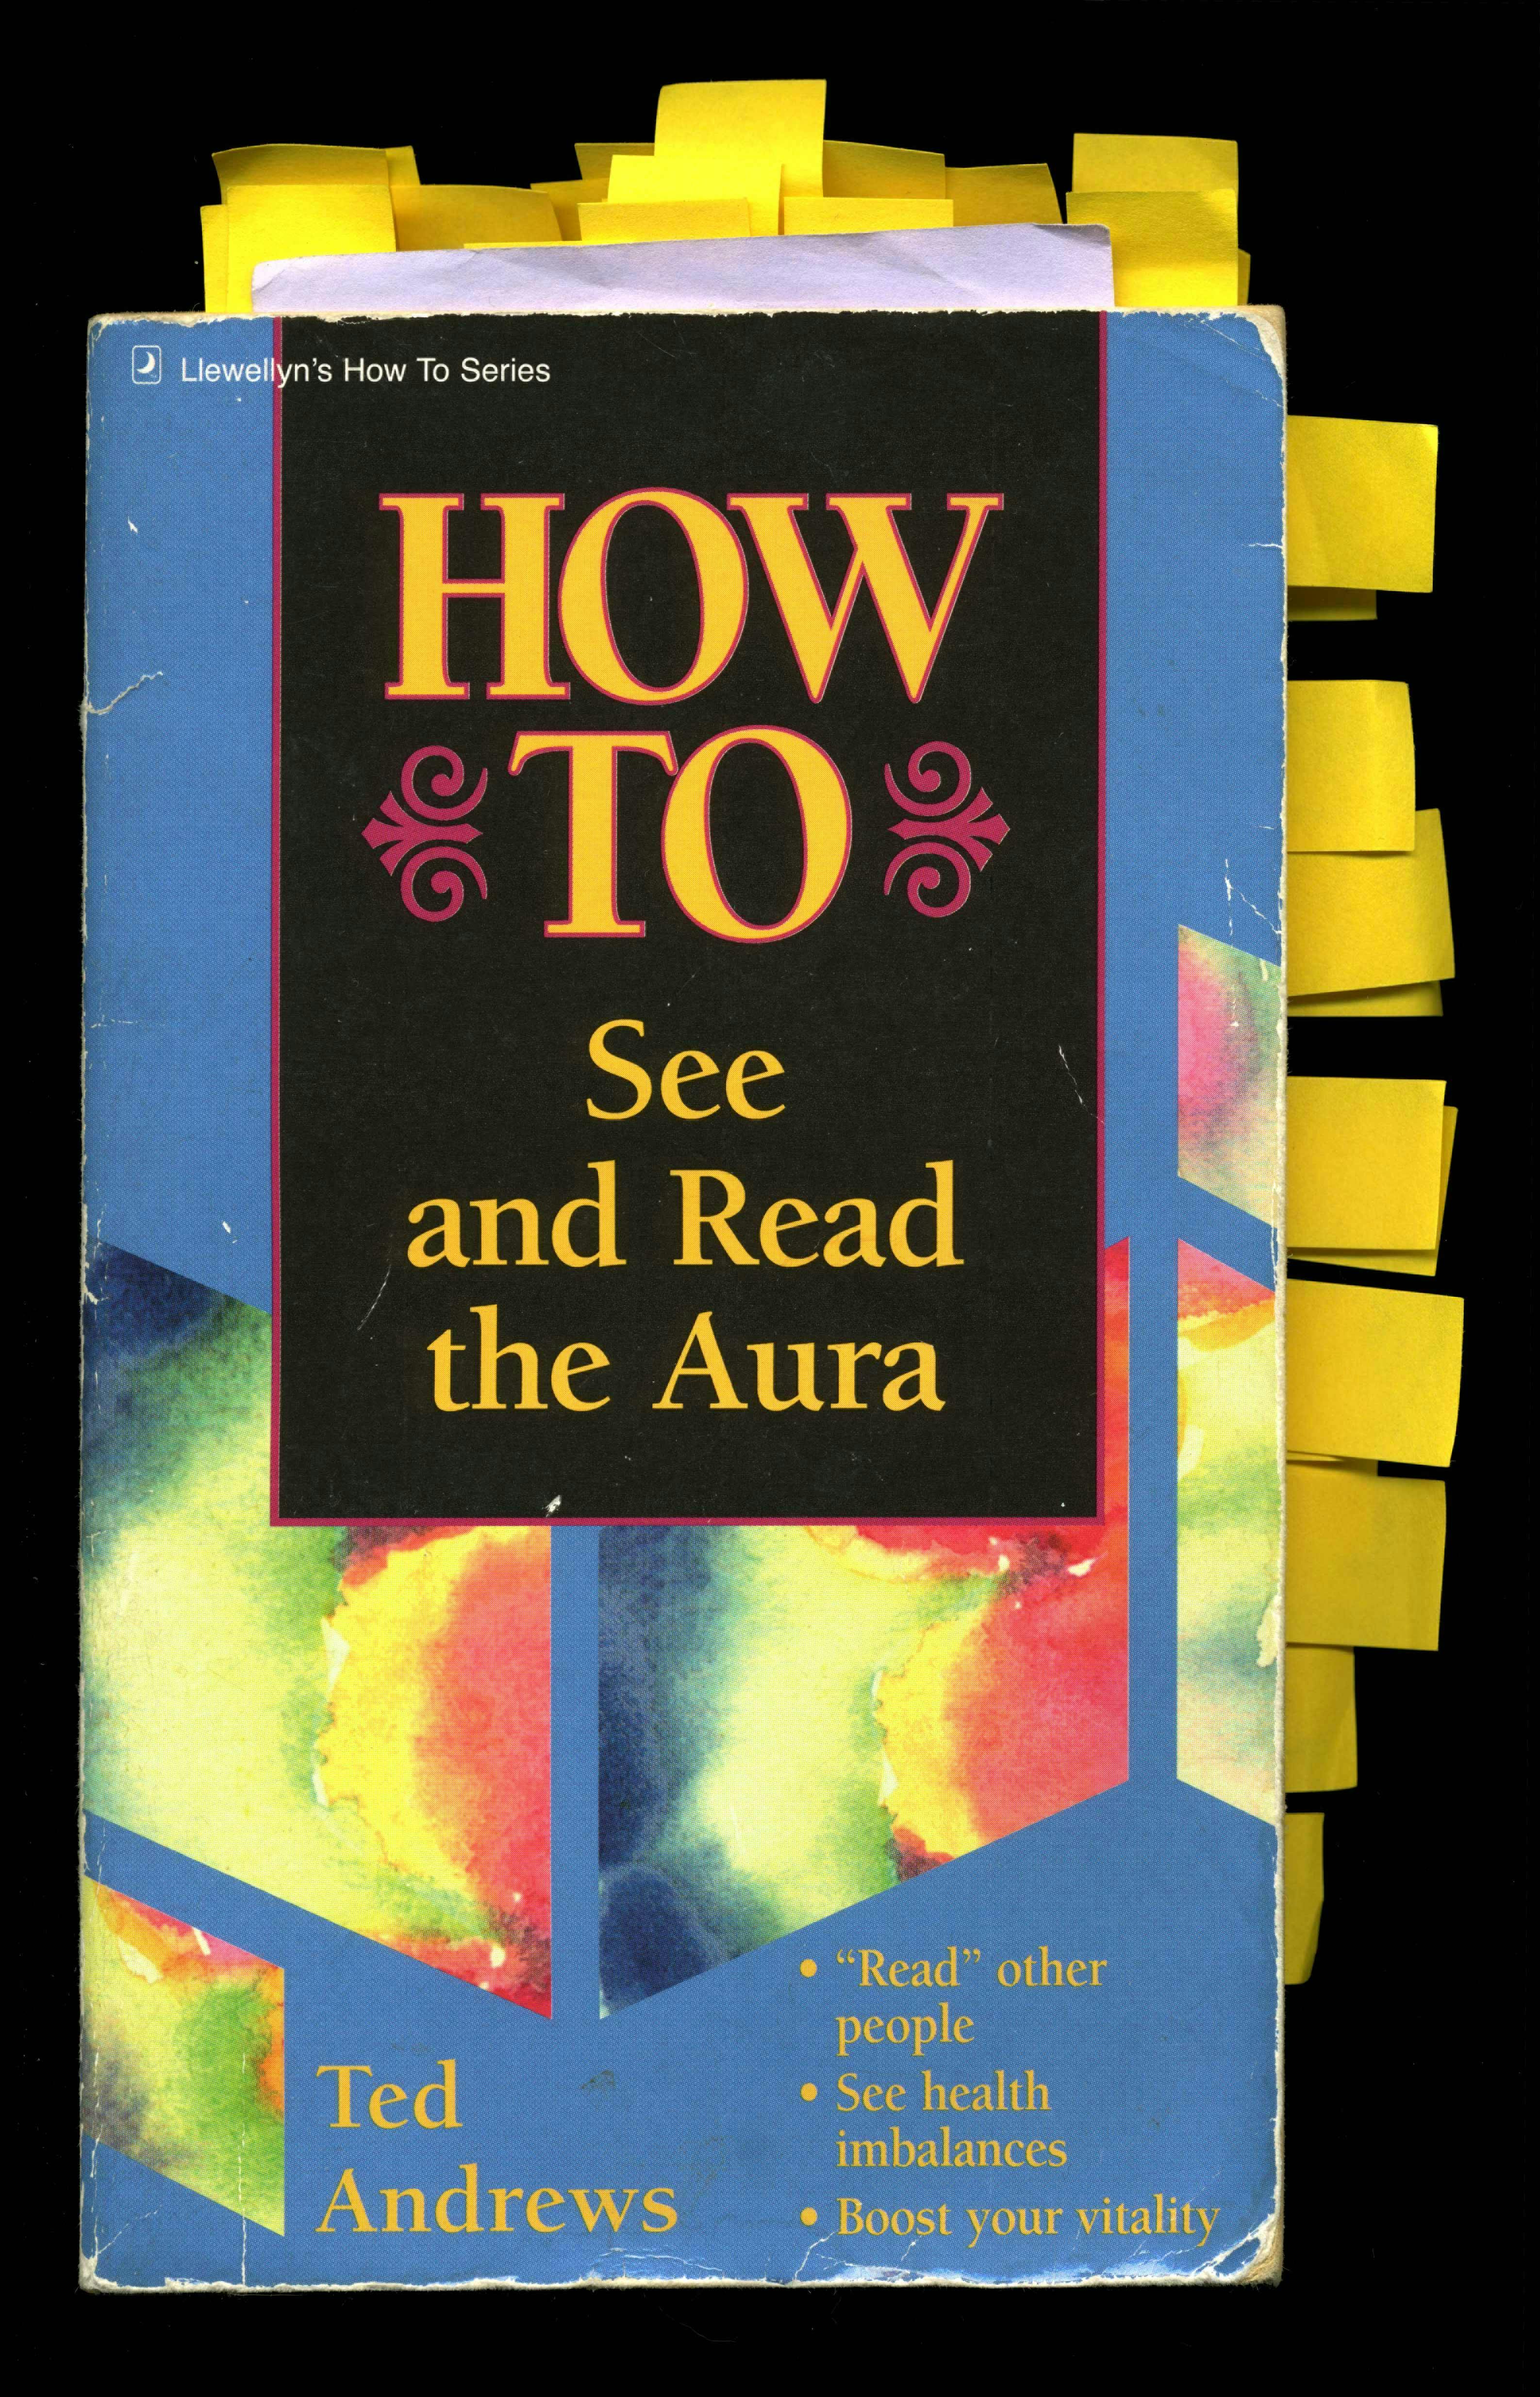 An image of the book “HOW TO See and Read the Aura.” The cover is blue with blocks of rainbow coloured patterns and large yellow text. Many tabs of yellow paper stick out from the sides of the book.